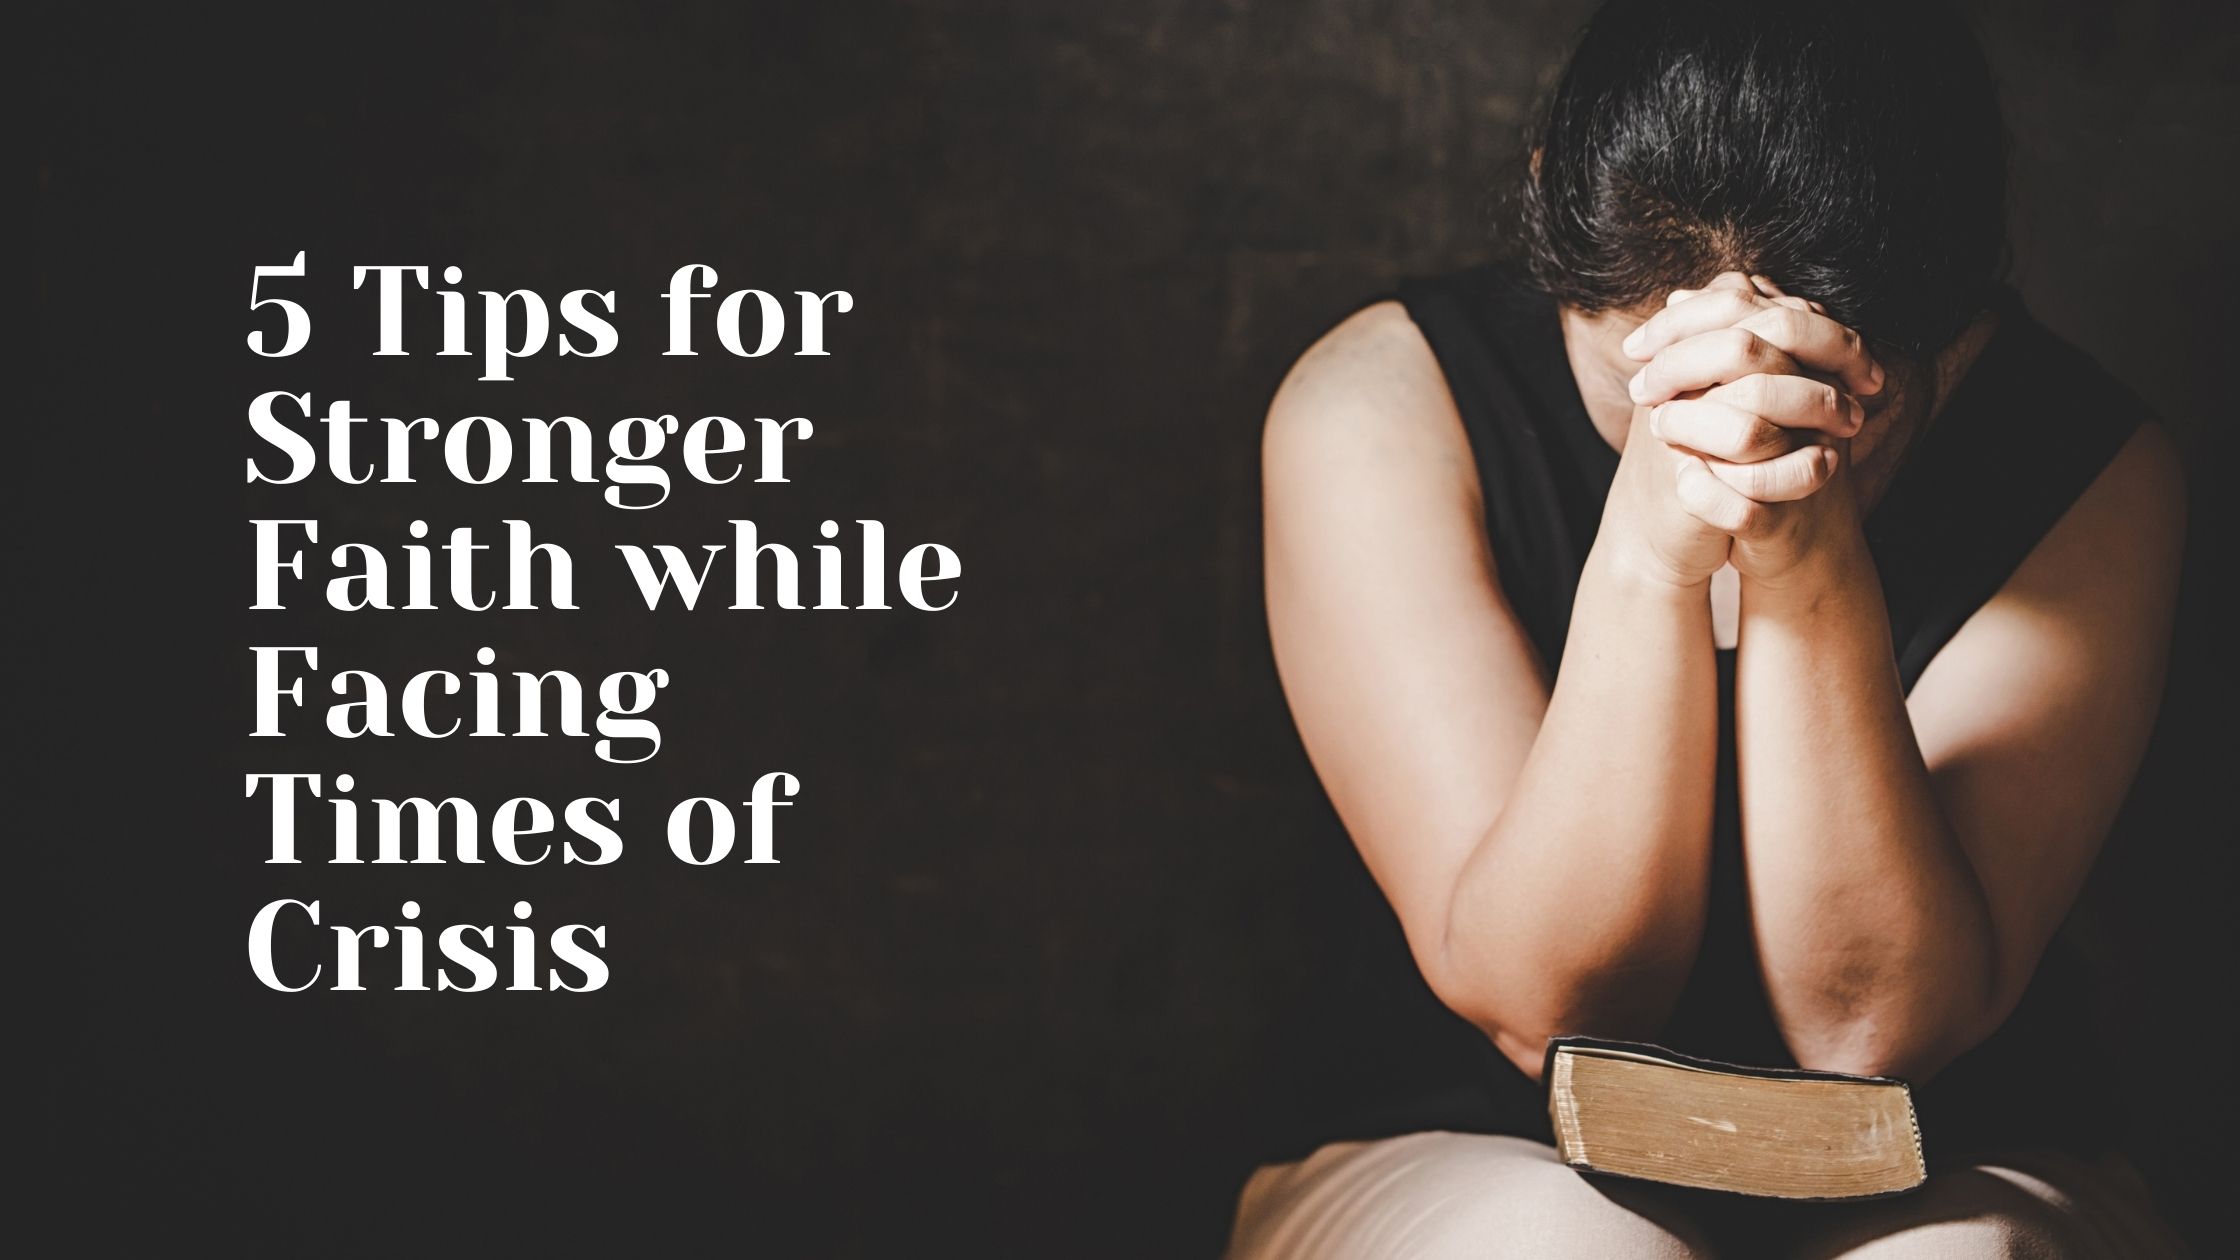 Image of 5 Tips for Stronger Faith while Facing Times of Crisis  